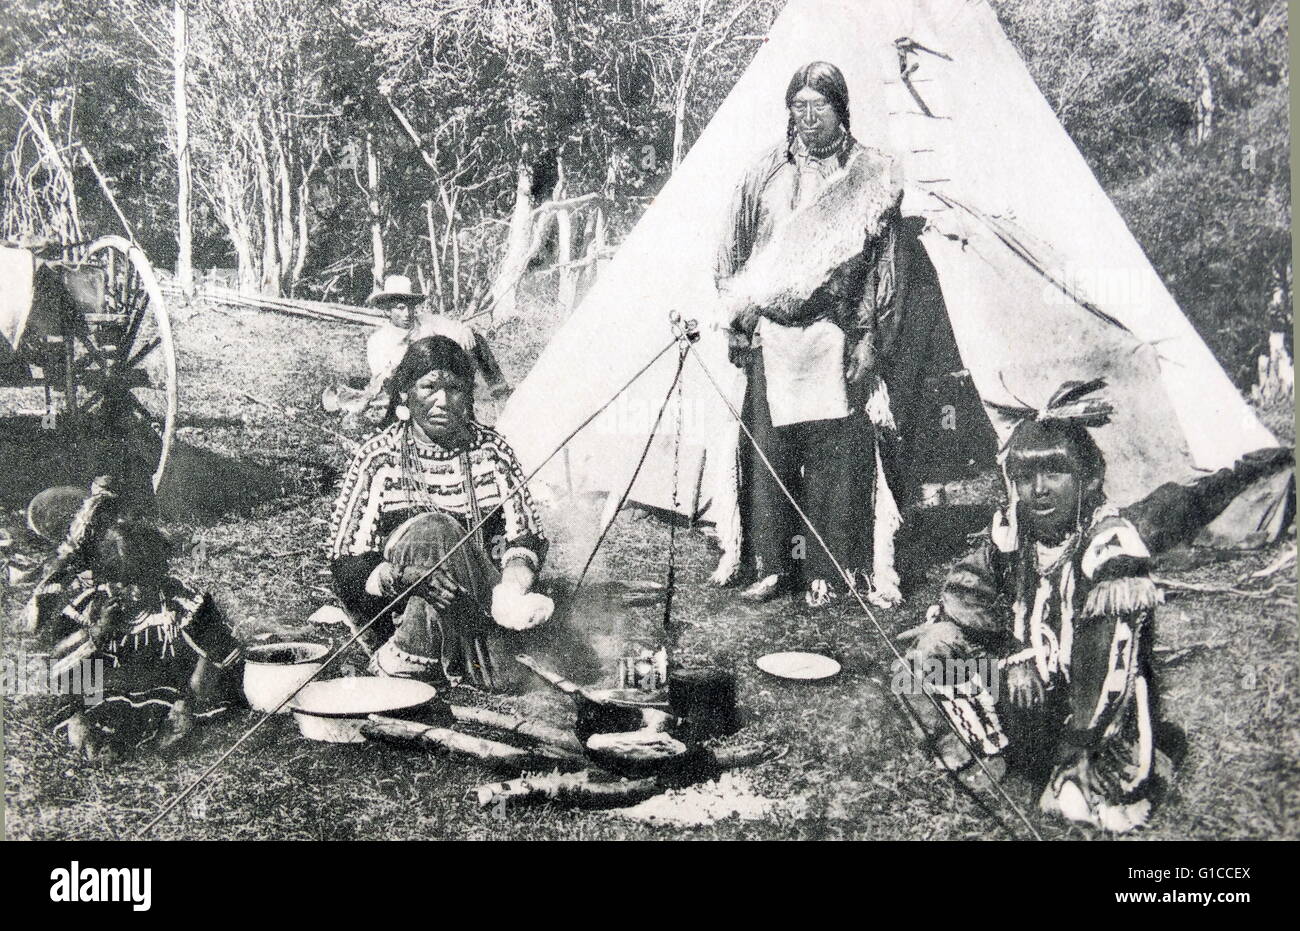 Native American Indians in front of a wigwam or tepee 1900 Stock Photo